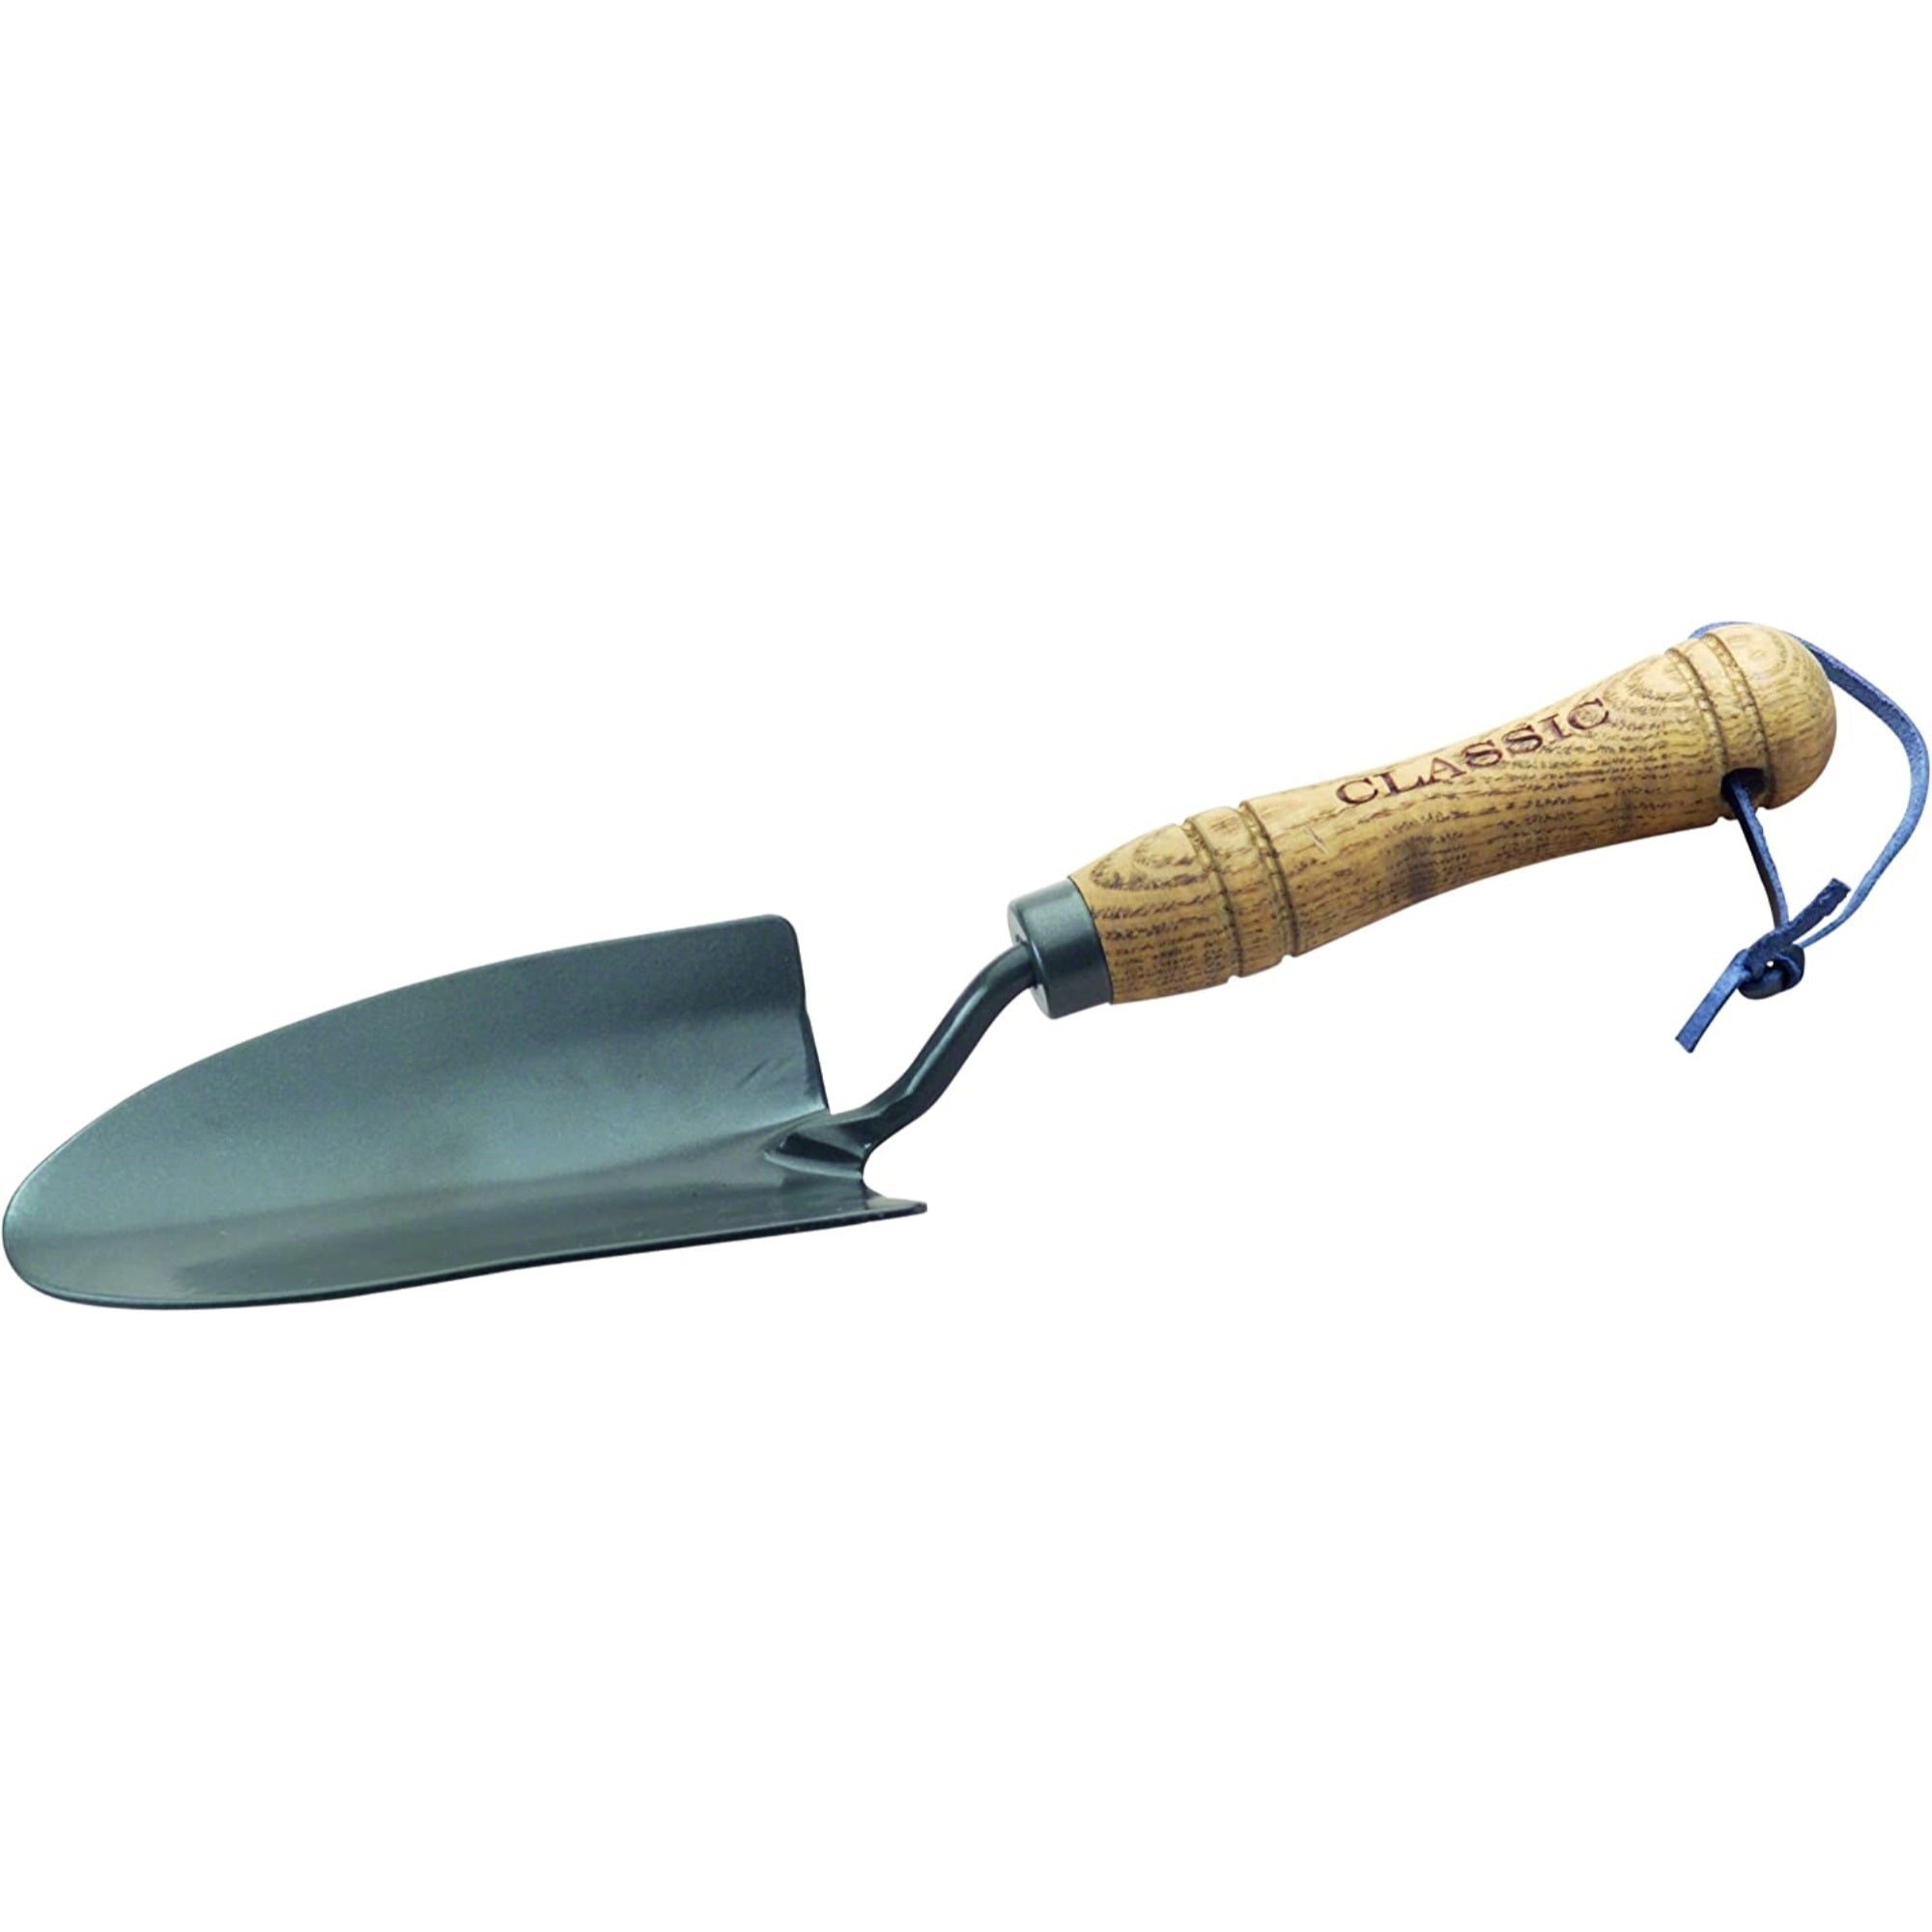 Flexrake Classic Hand Trowel with Steel Blades & Wooden Handle